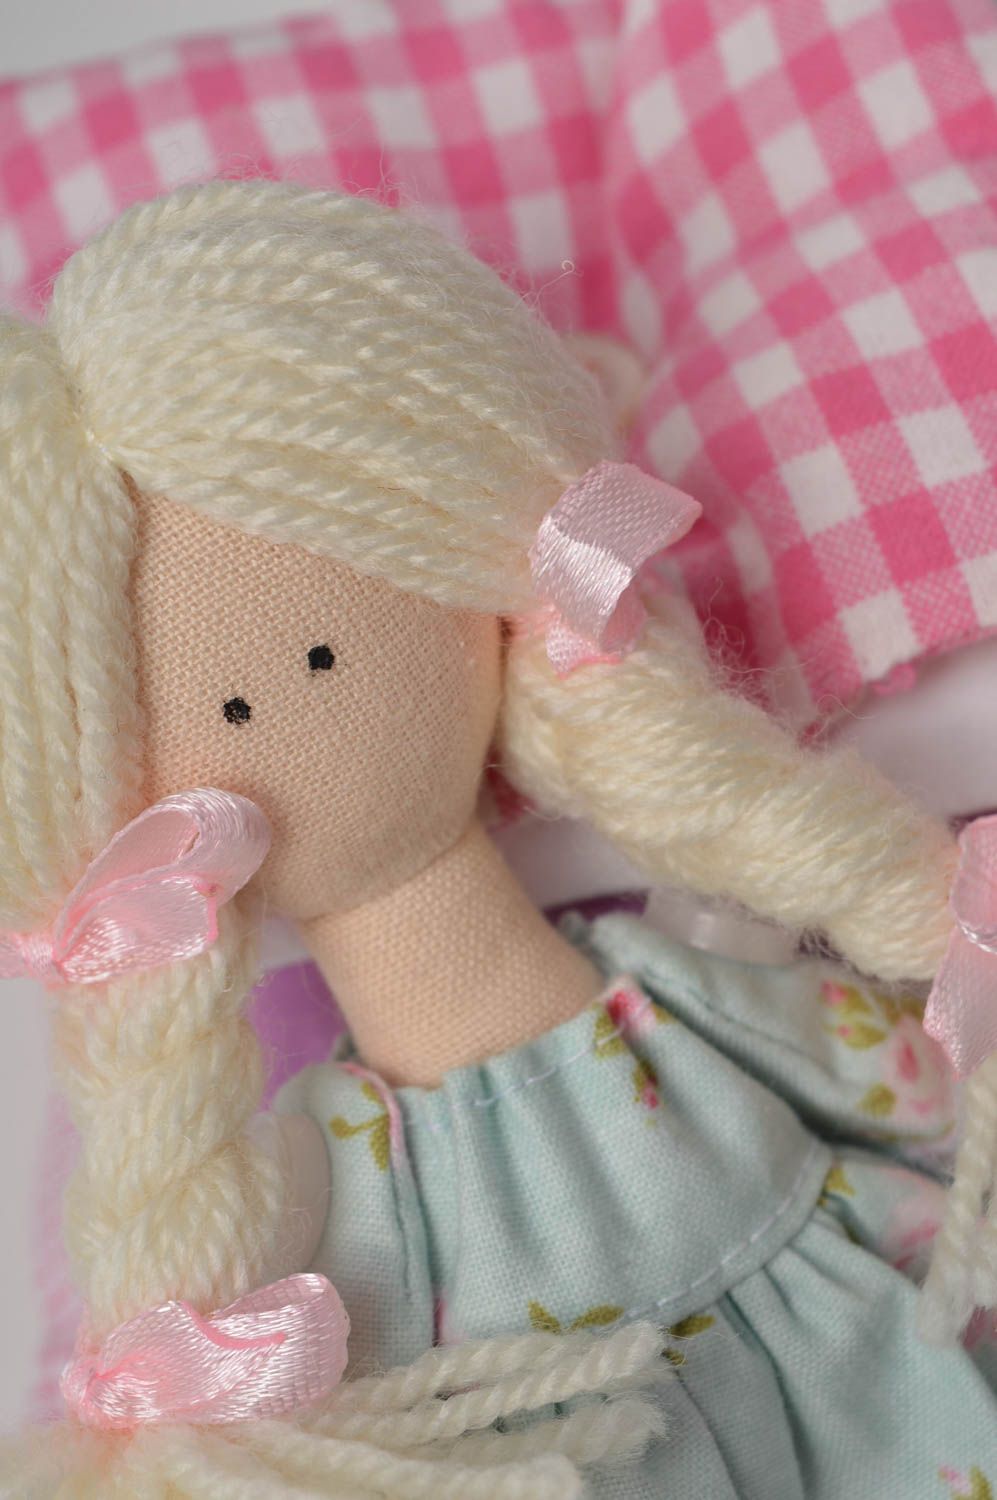 Handmade doll designer doll unusual gift for baby doll with pillow decor ideas photo 3